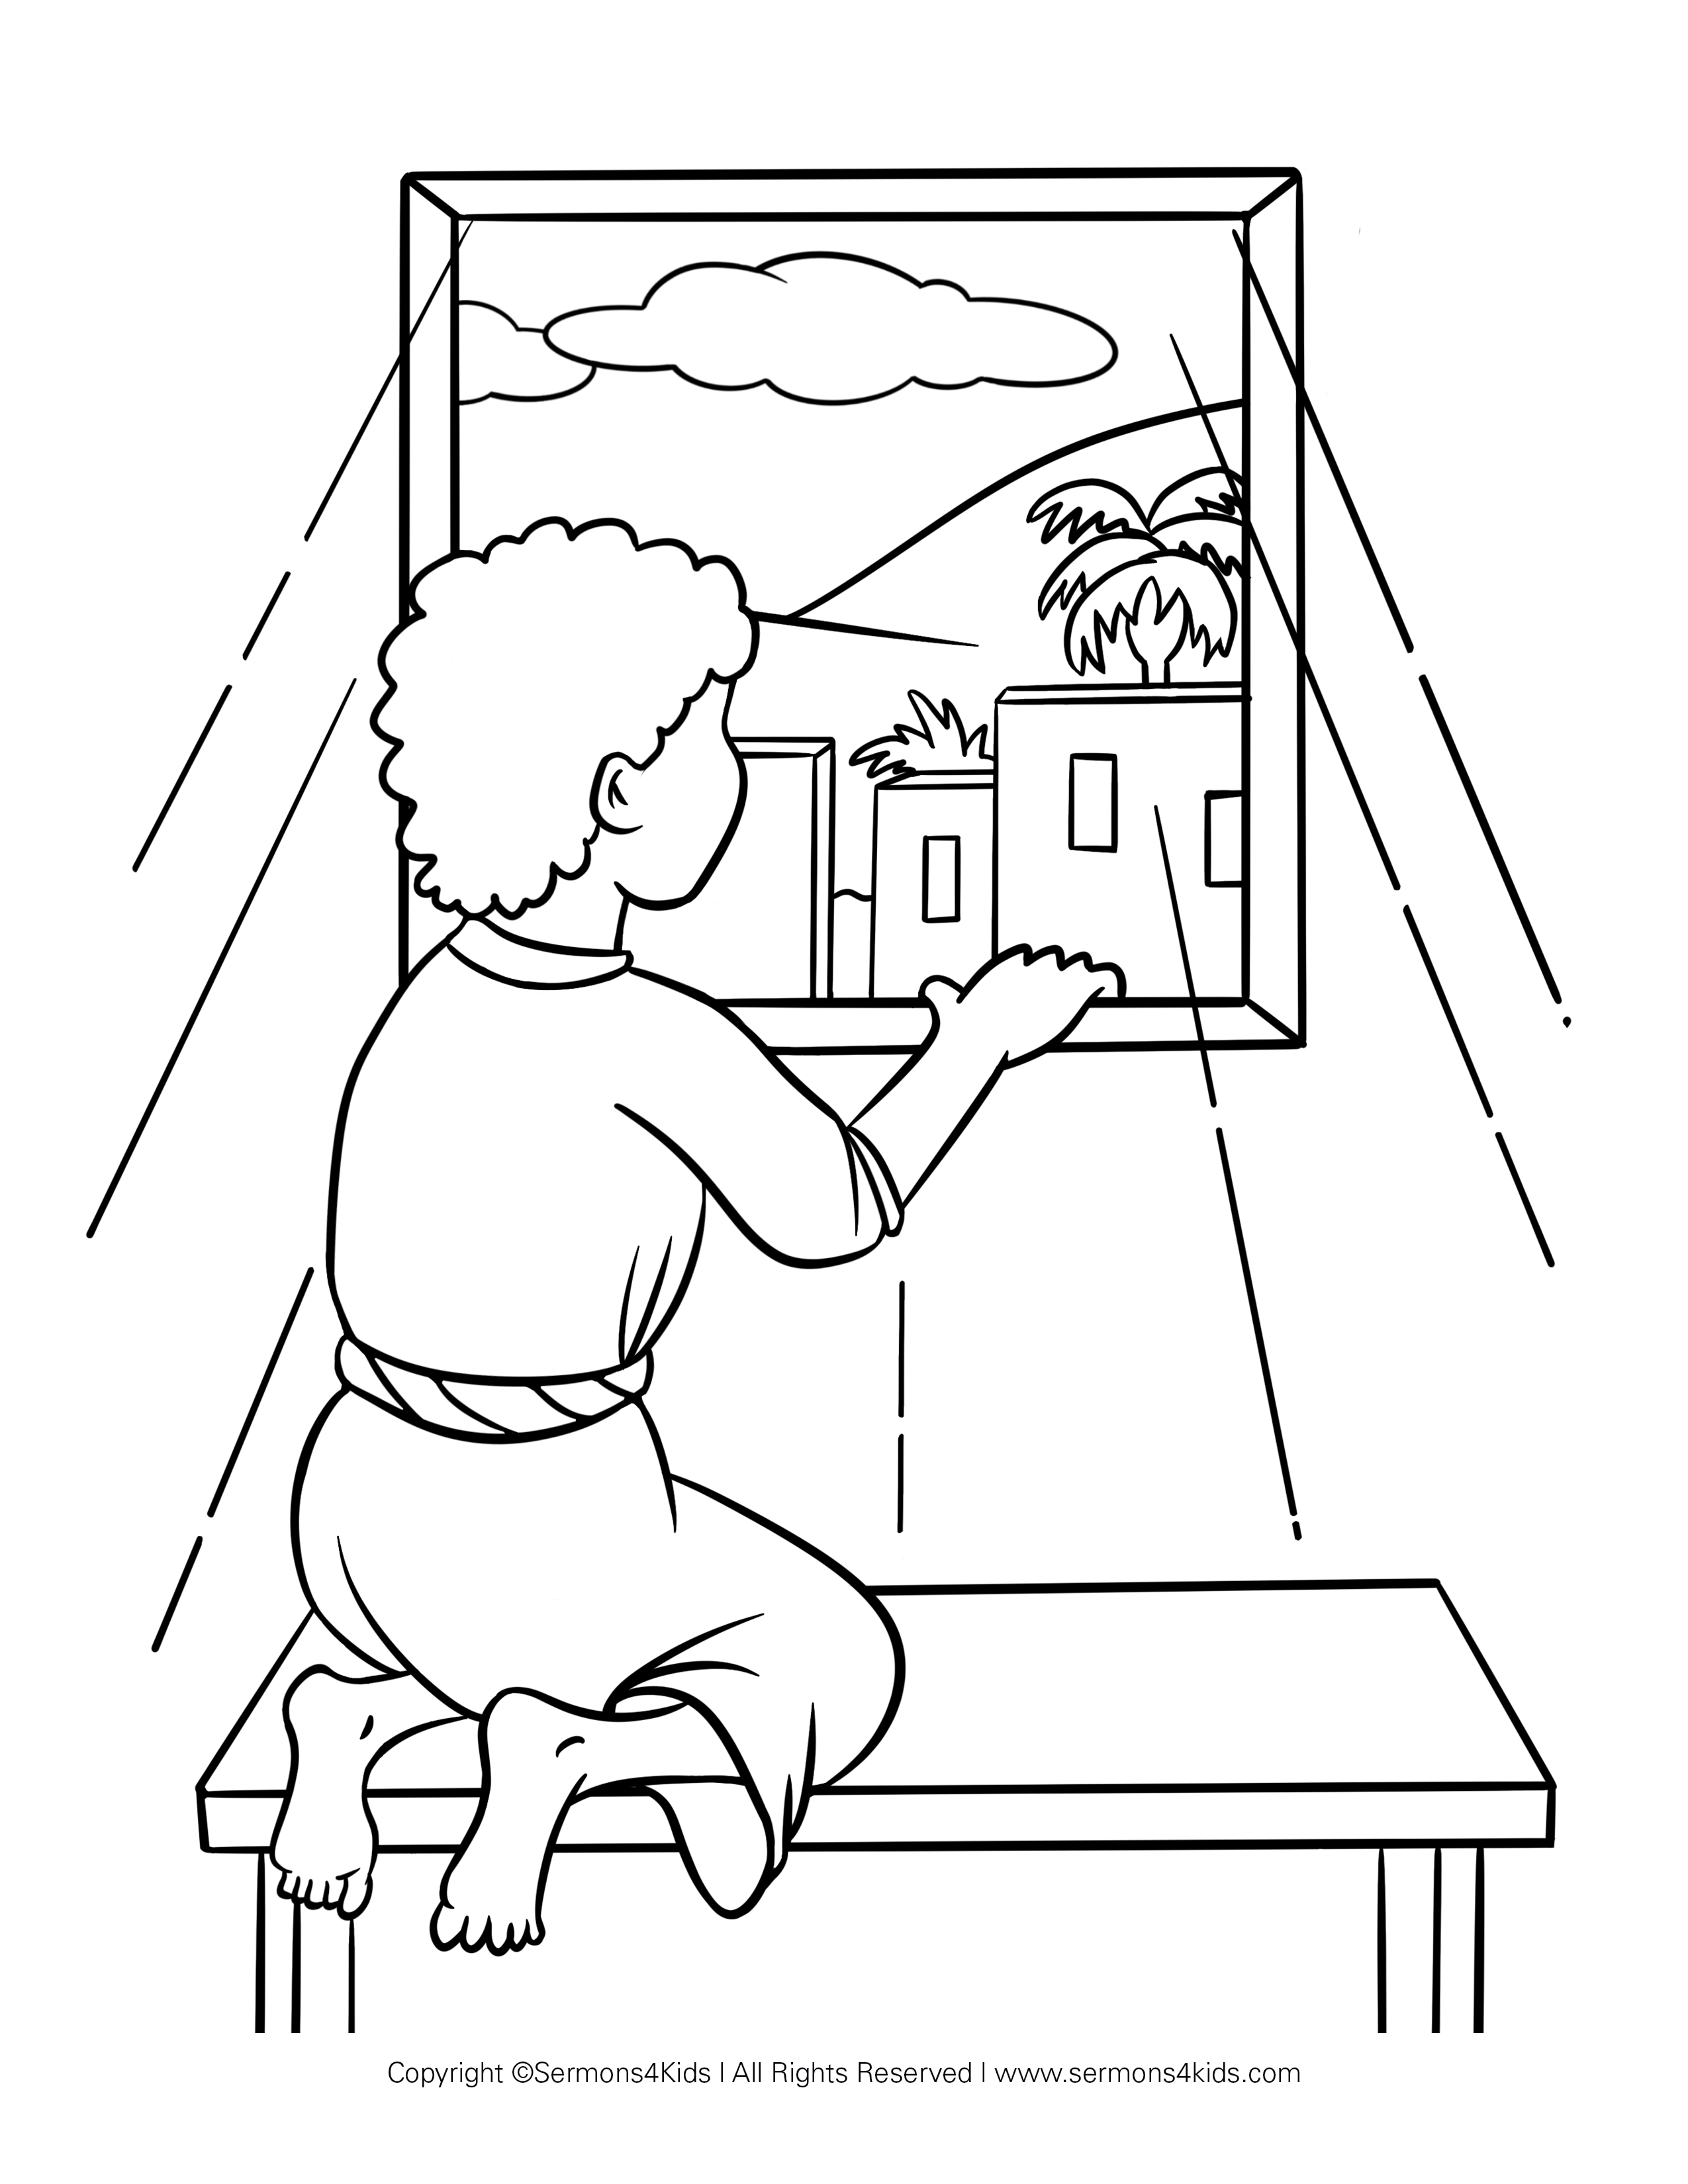 The Calling of Jeremiah Coloring Page | Sermons4Kids